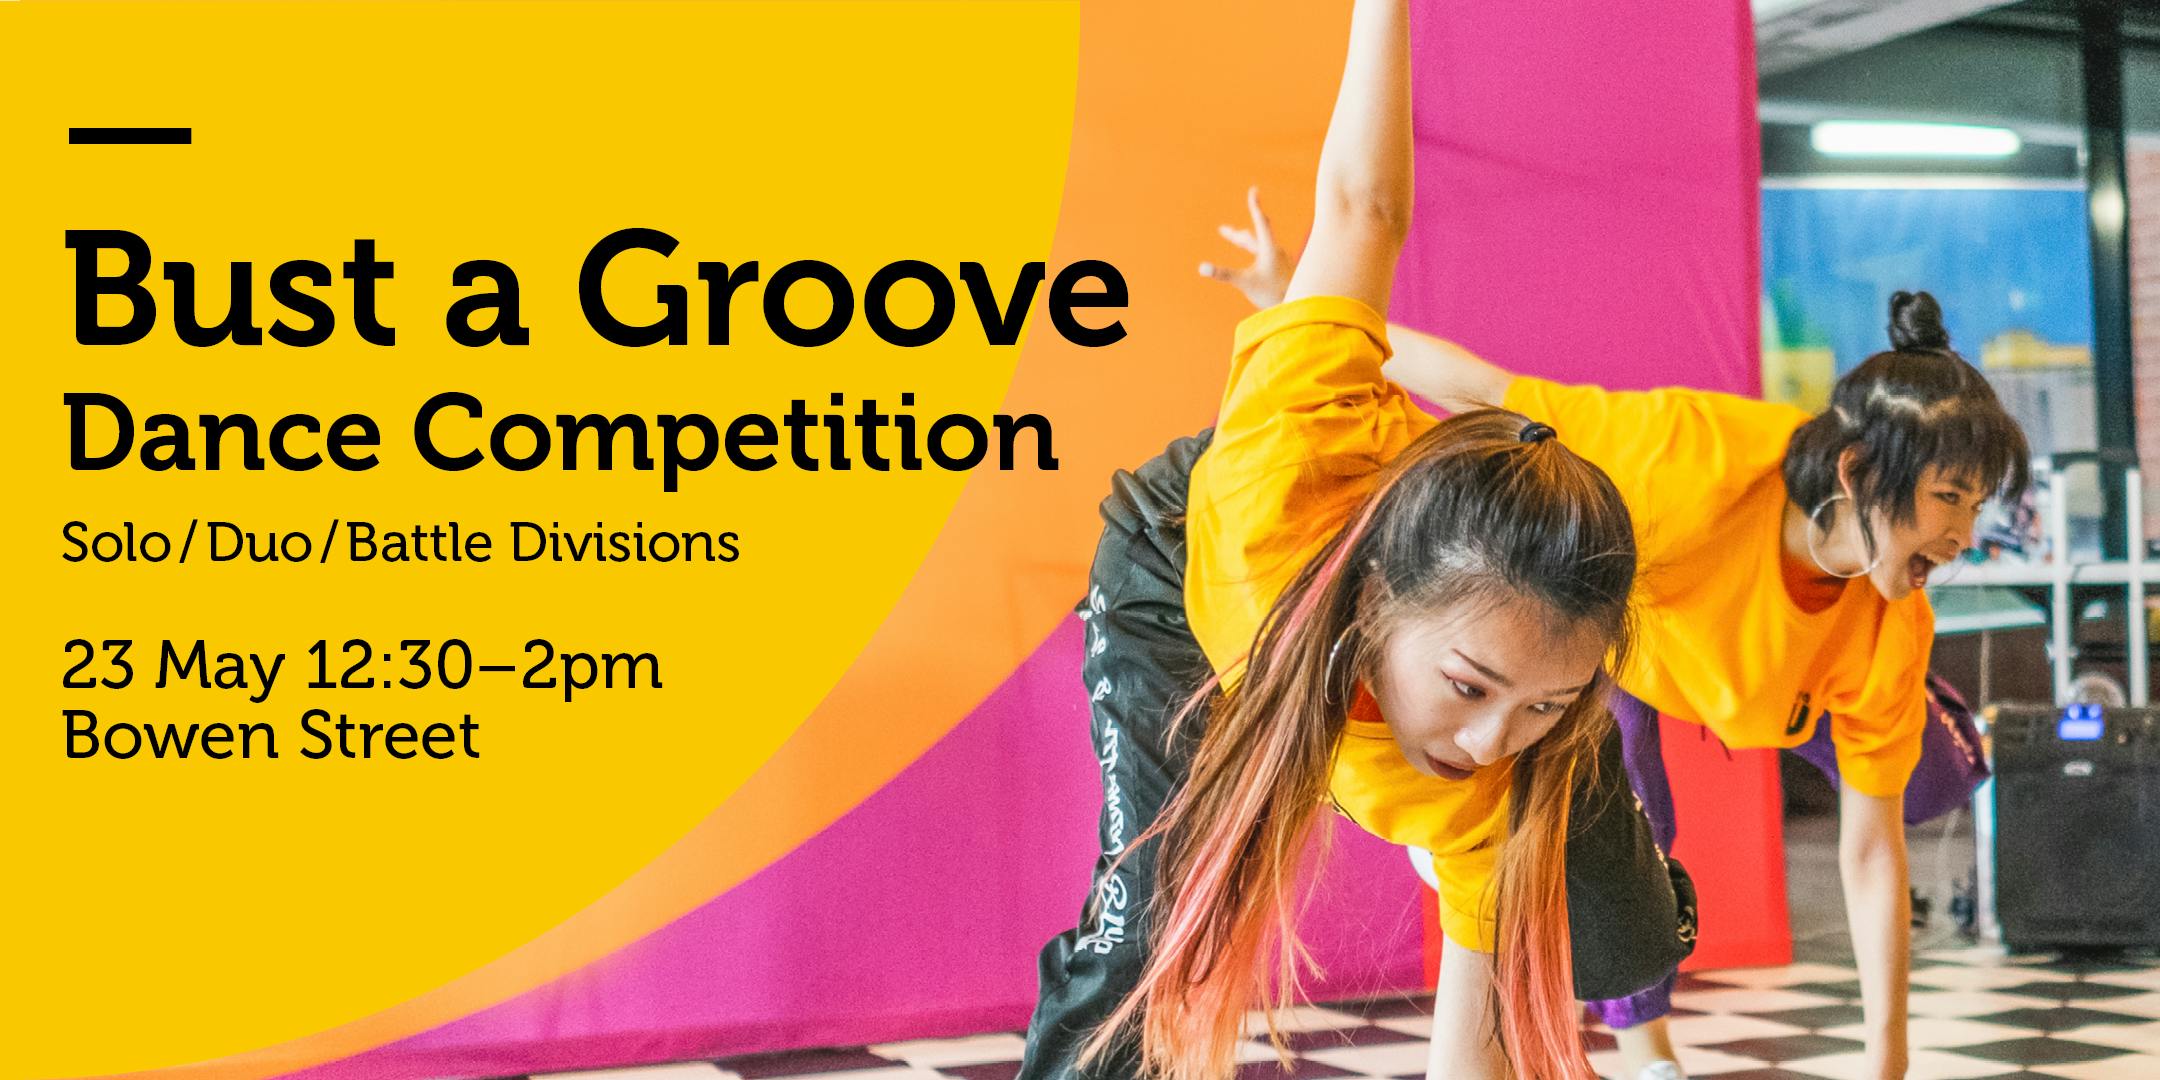 Bust A Groove Dance Competition